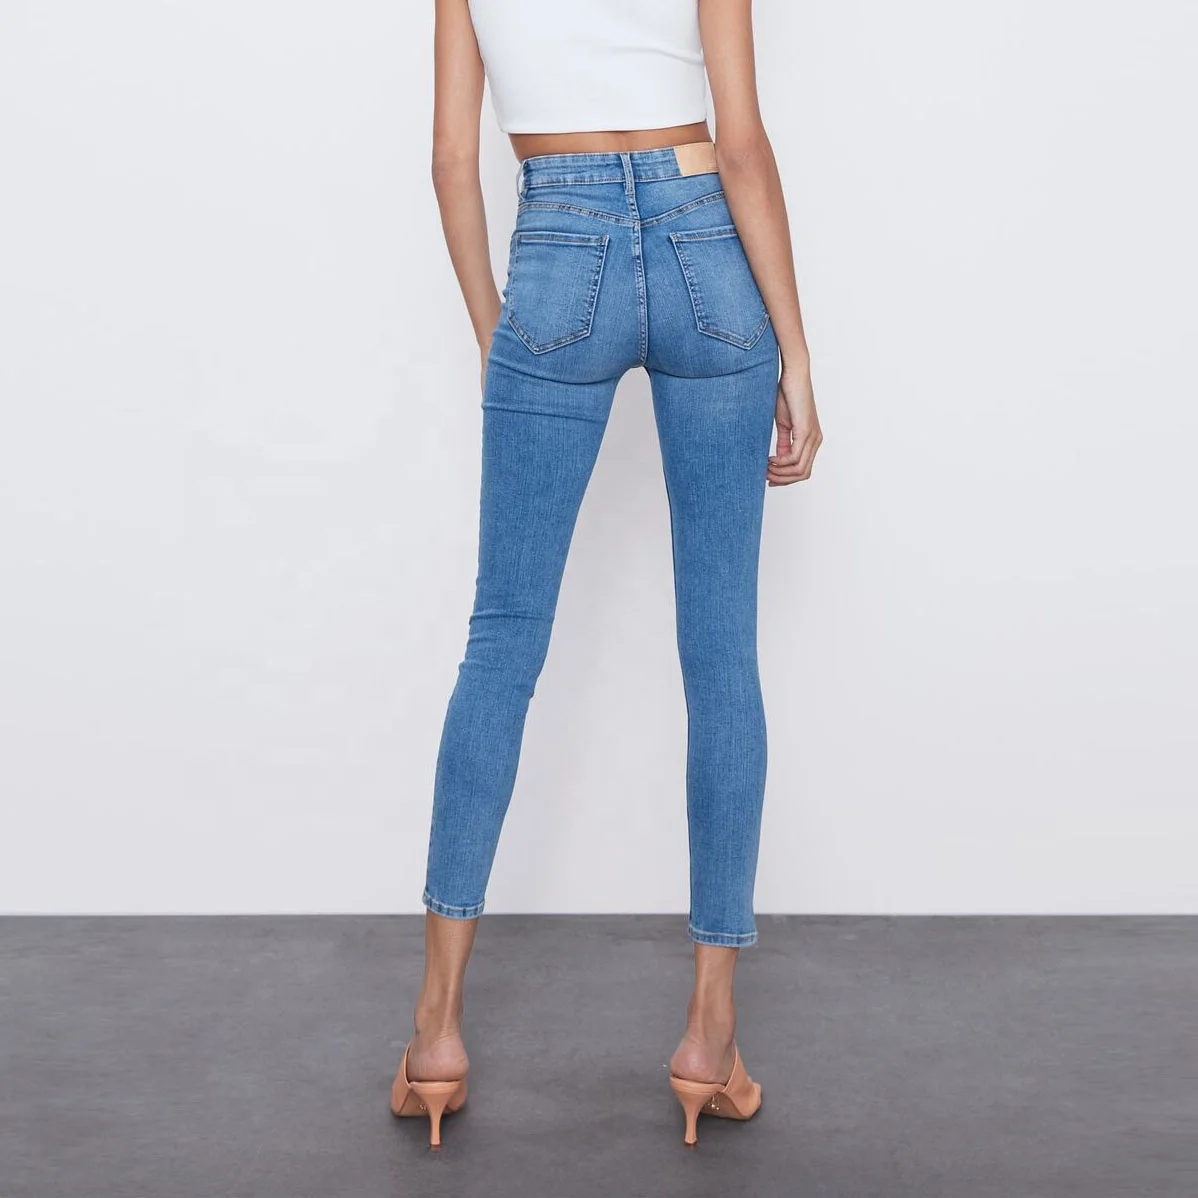 avontuur opslaan Grondwet Stretch Jeans Hoge Taille Britain, SAVE 30% - online-pmo.com